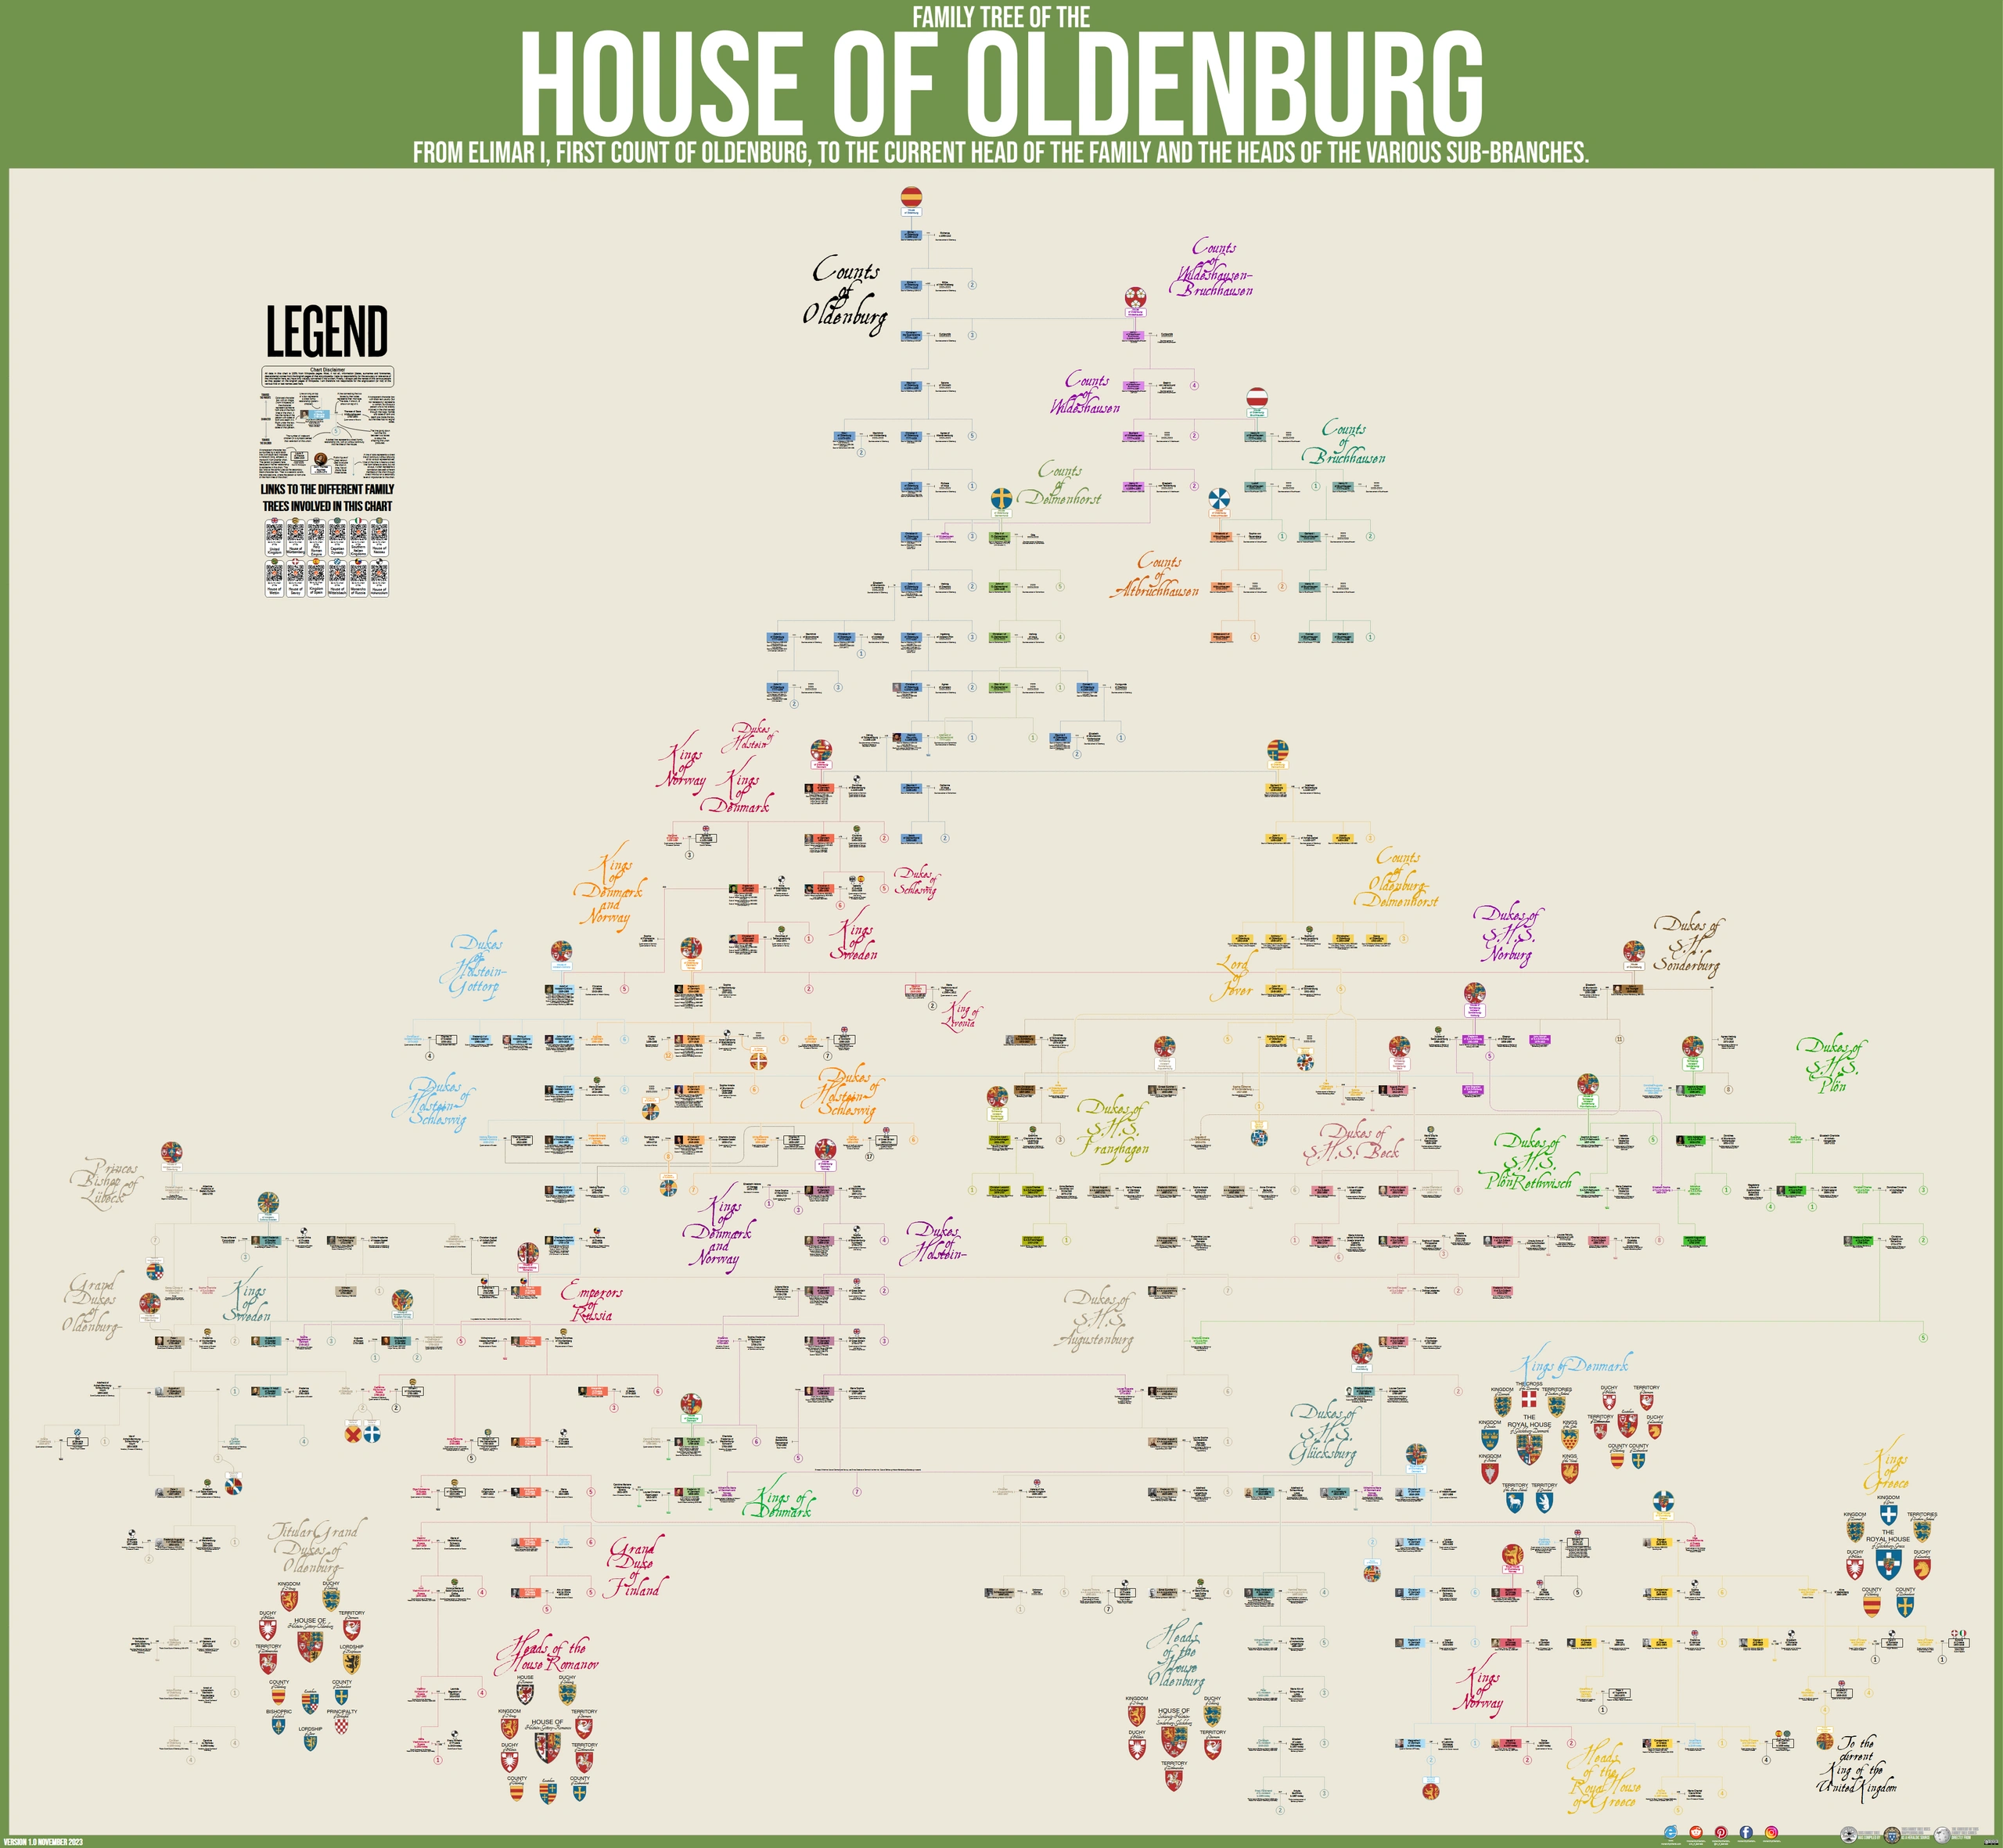 CHART, FAMILY TREE OF THE HOUSE OF OLDENBURG